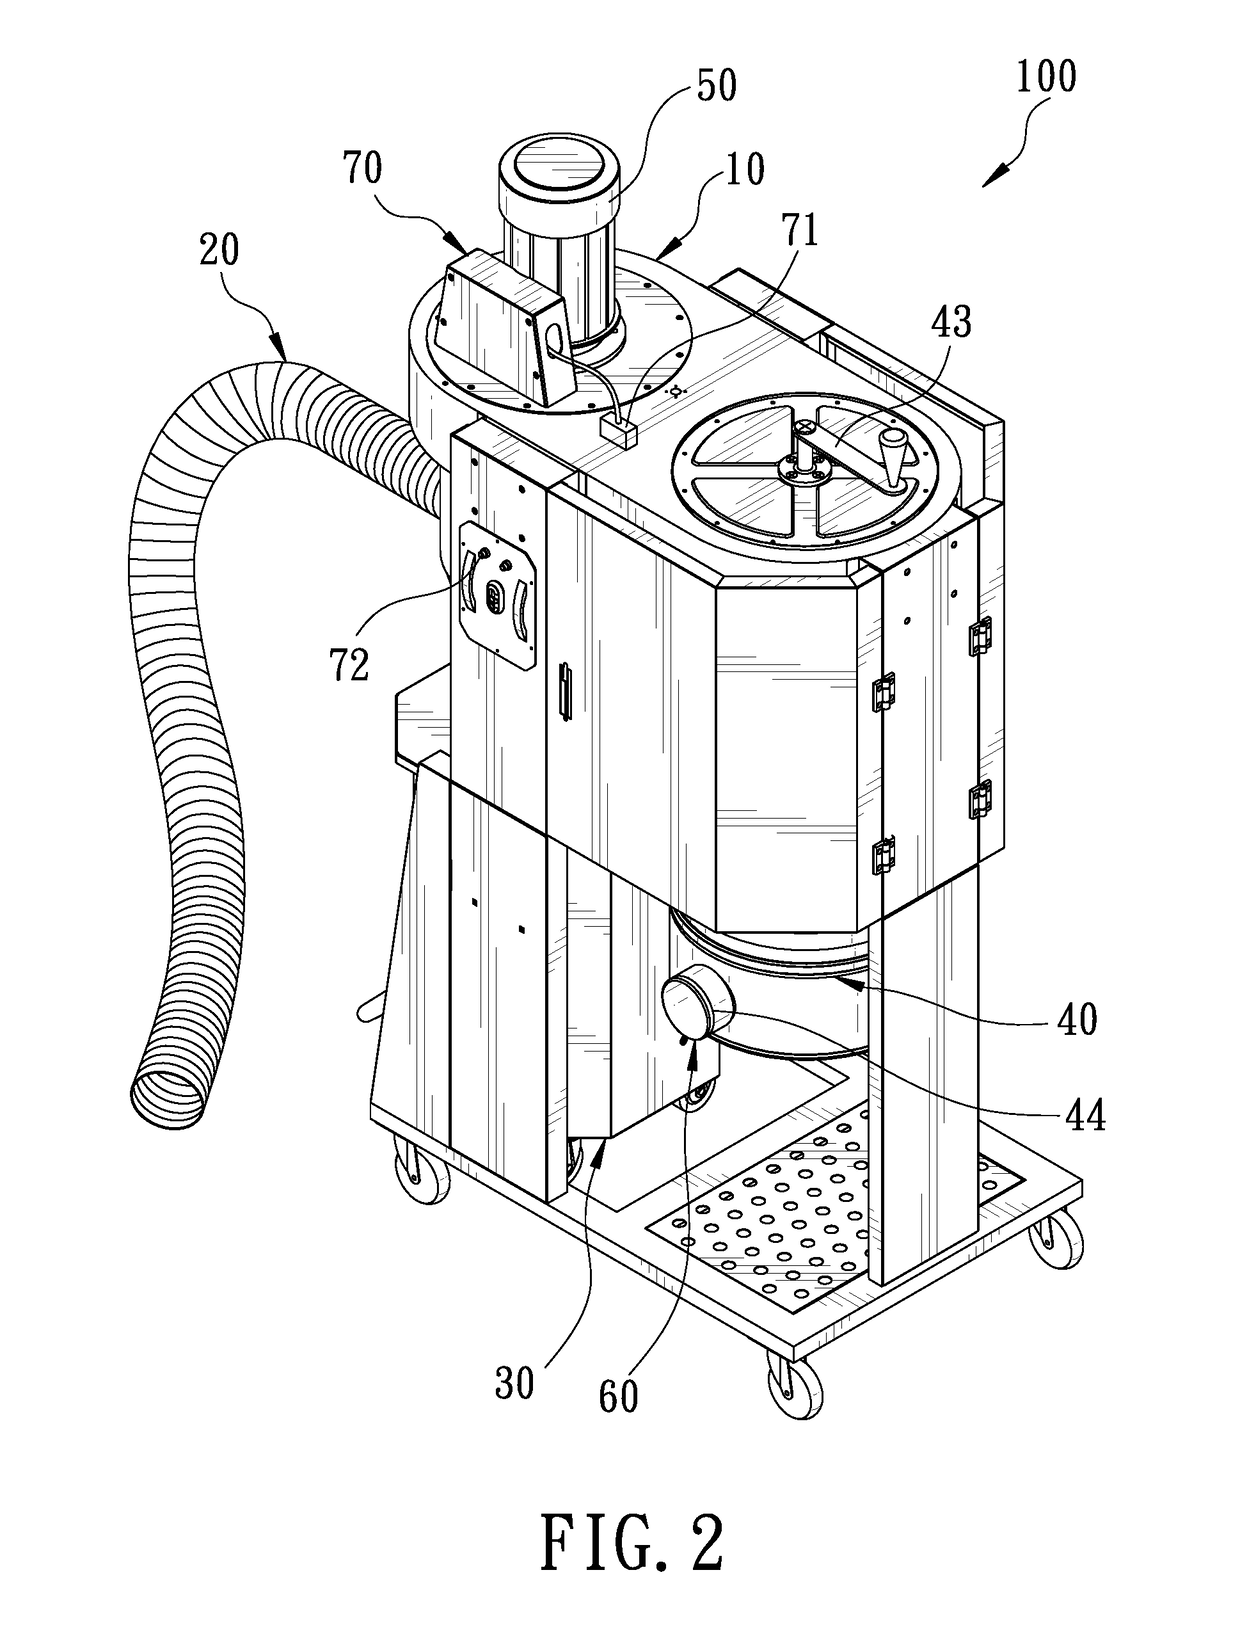 Dust collector capable of recollecting particulate dust in the filter barrel